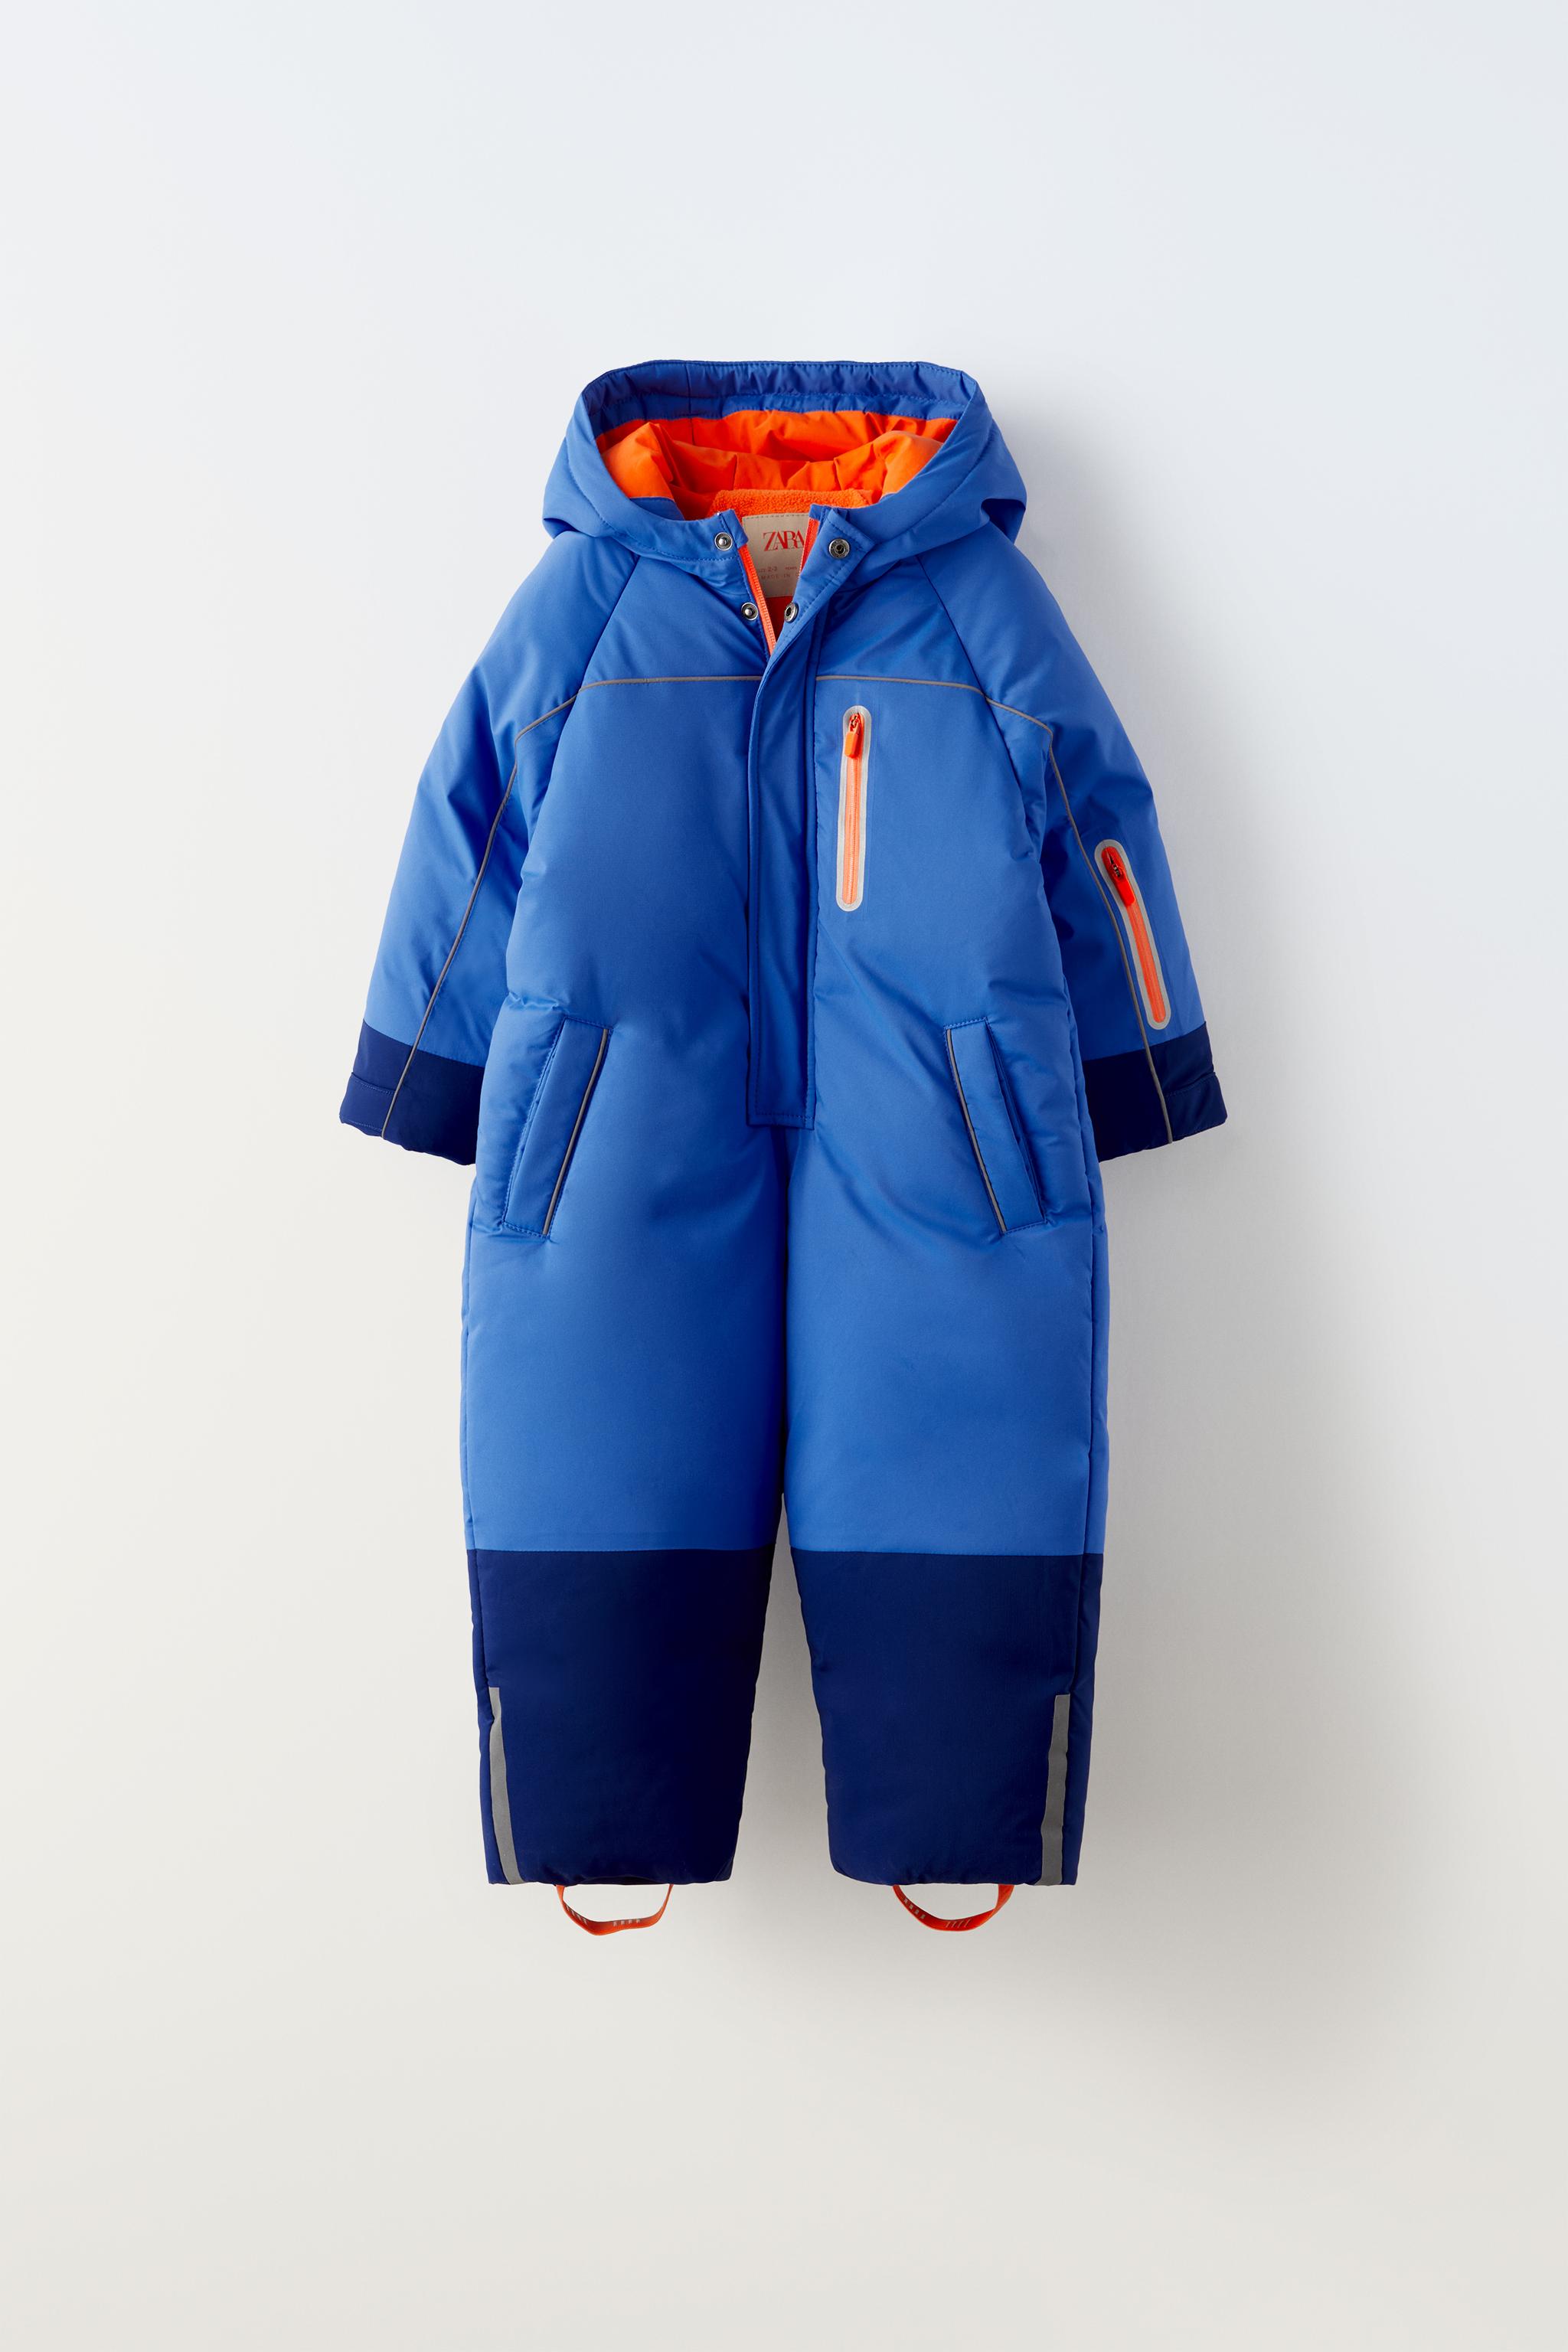 WATER REPELLENT AND WIND RESISTANT SNOW SUIT SKI COLLECTION